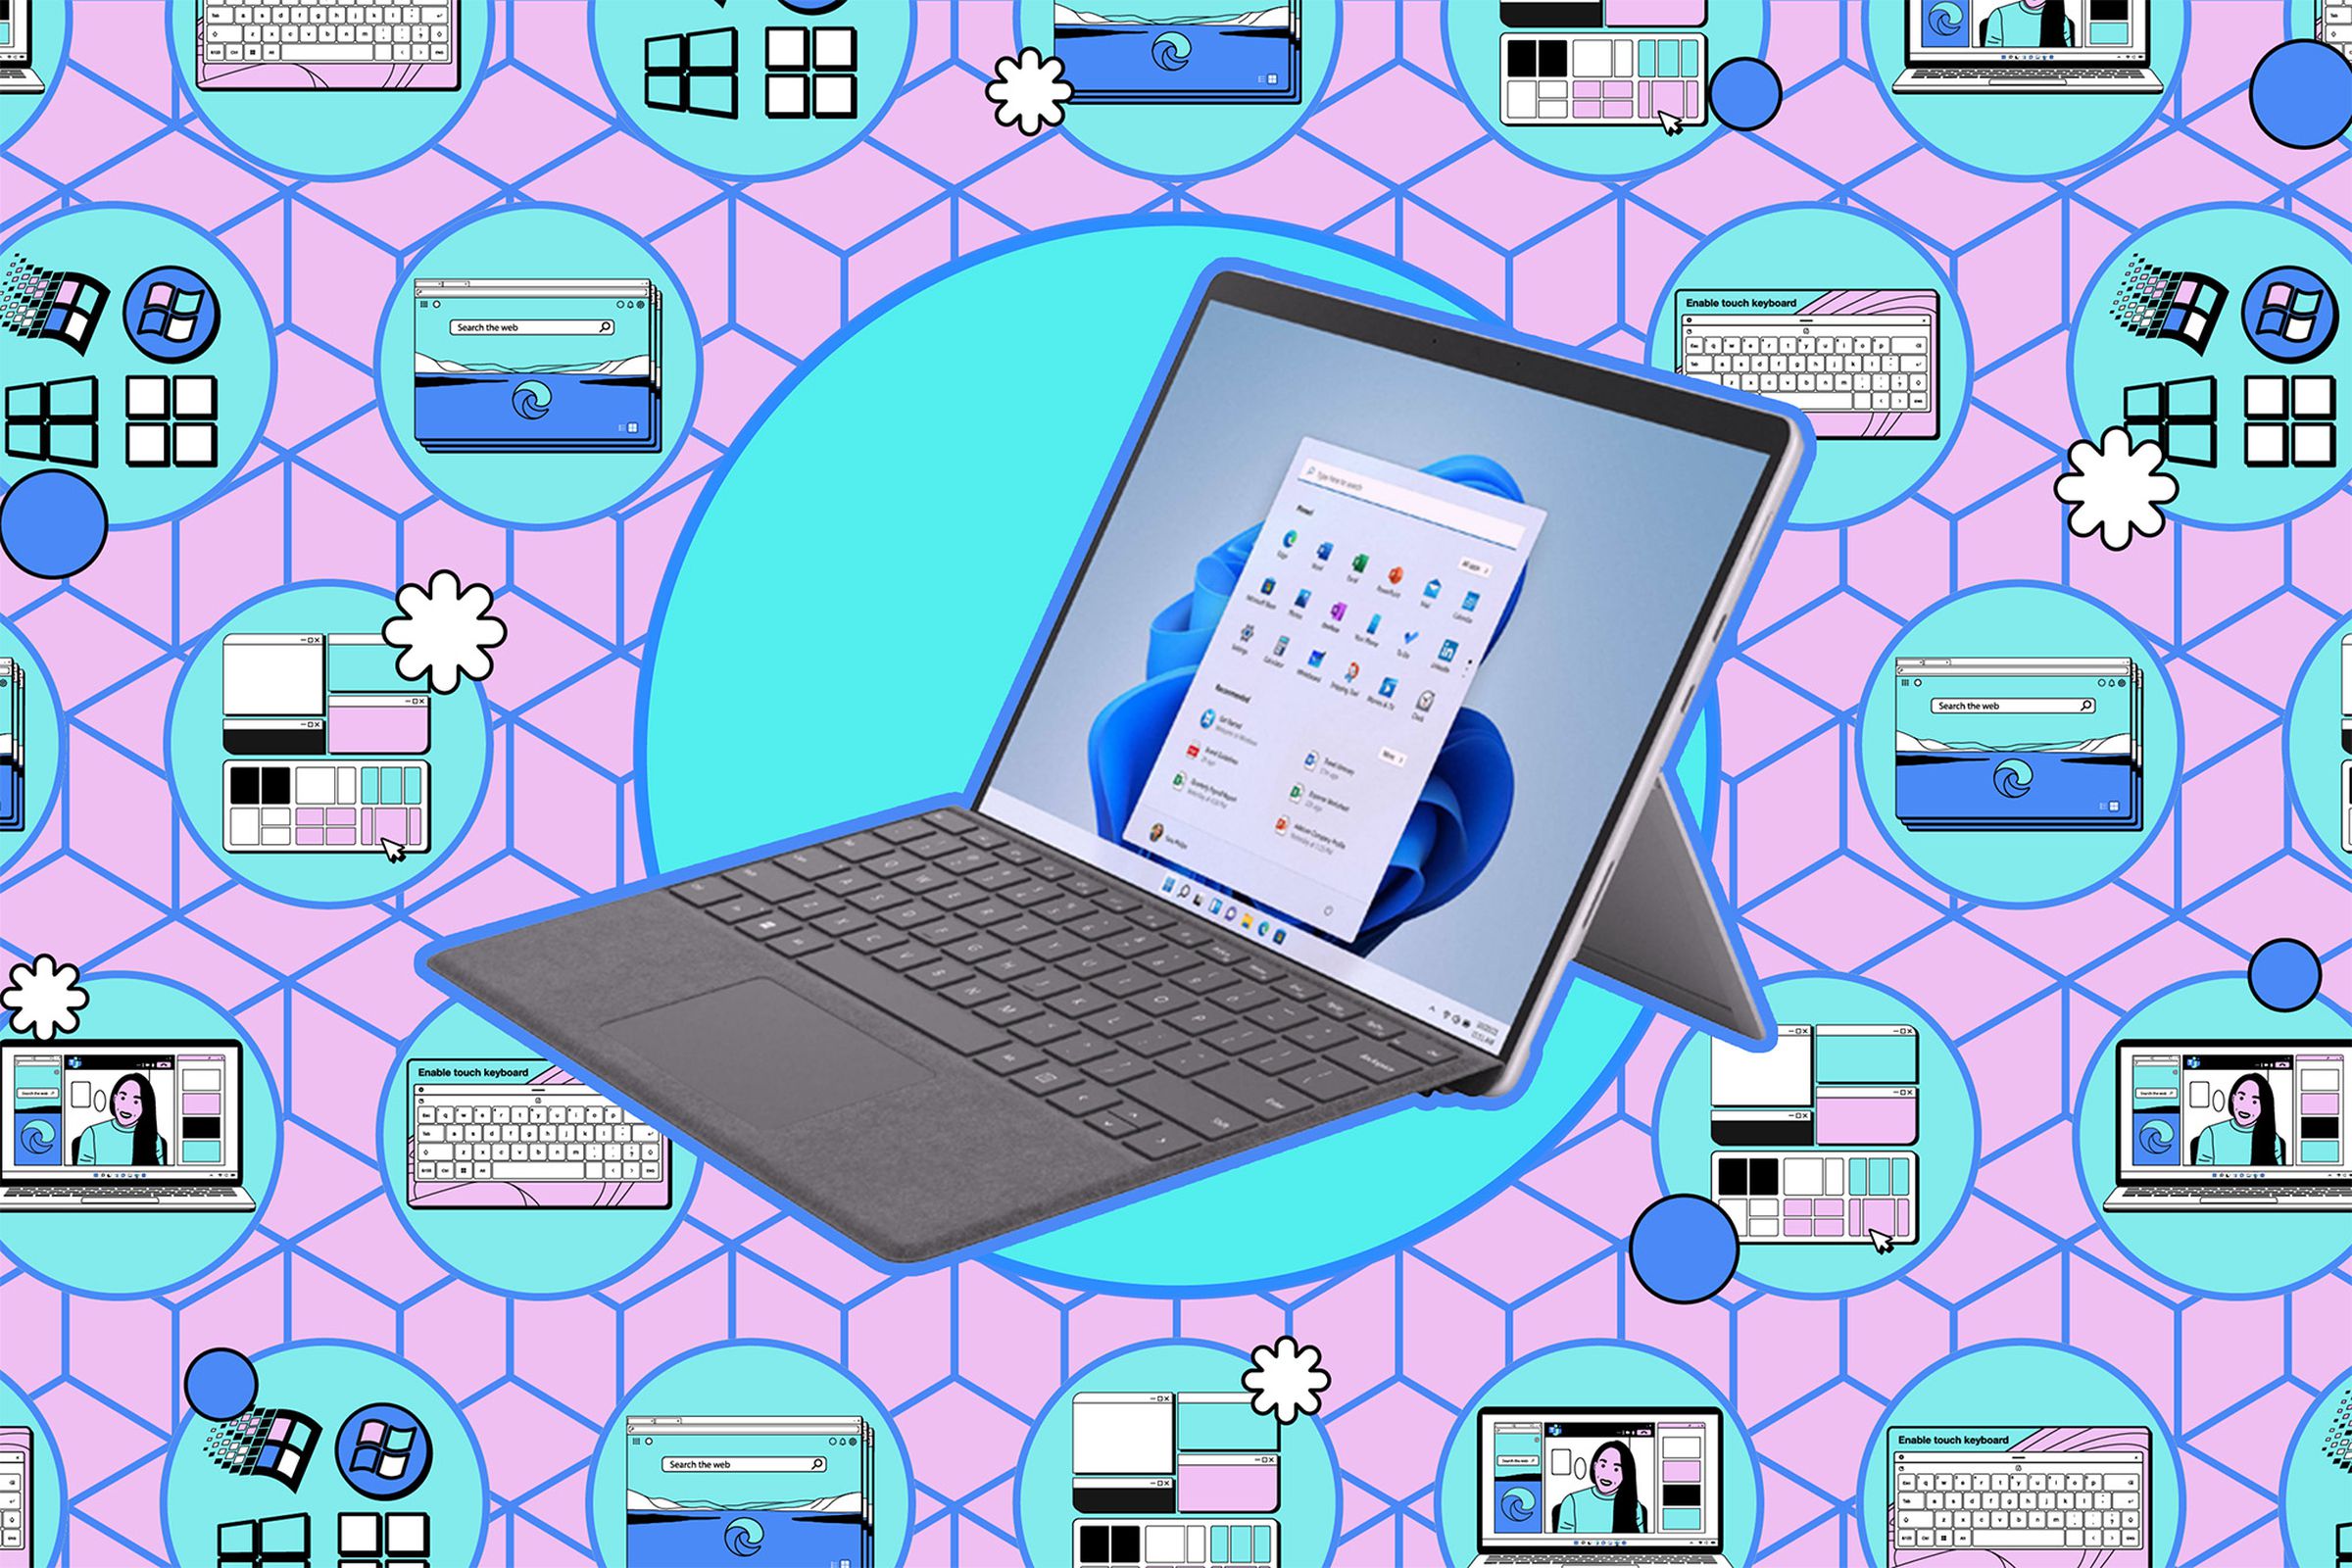 A Surface Pro in laptop mode displaying the Windows Start menu sits over a collage background of cartoon Windows logos, keyboards, and screens.